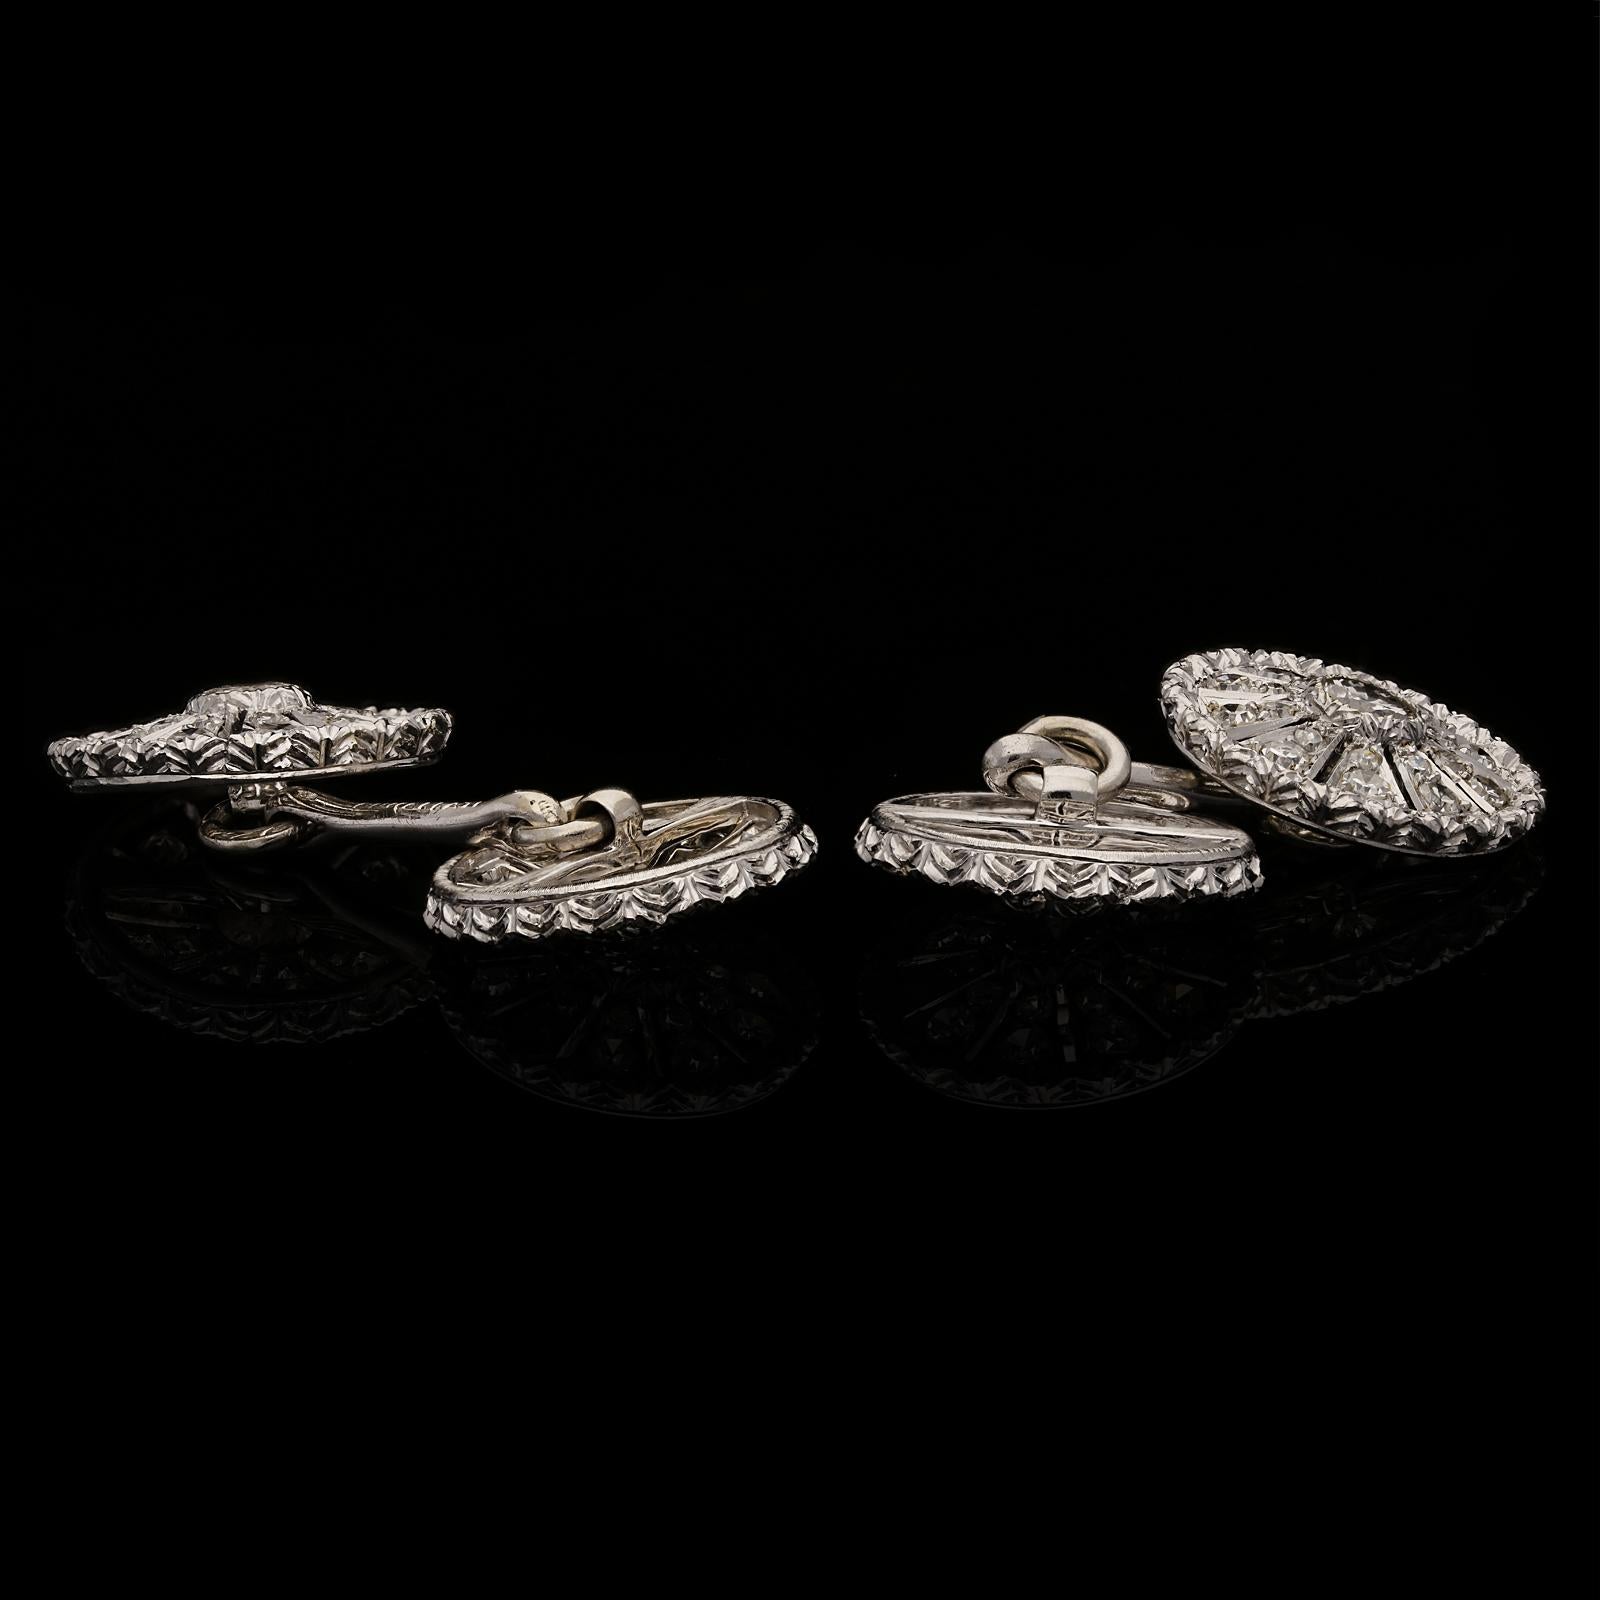 An elegant pair of diamond and platinum cufflinks by Buccellati c.1950s, the double ended cufflinks with four matching circular faces of cart wheel design, each centred with a round brilliant cut diamond in bezel setting, from which radiate ten